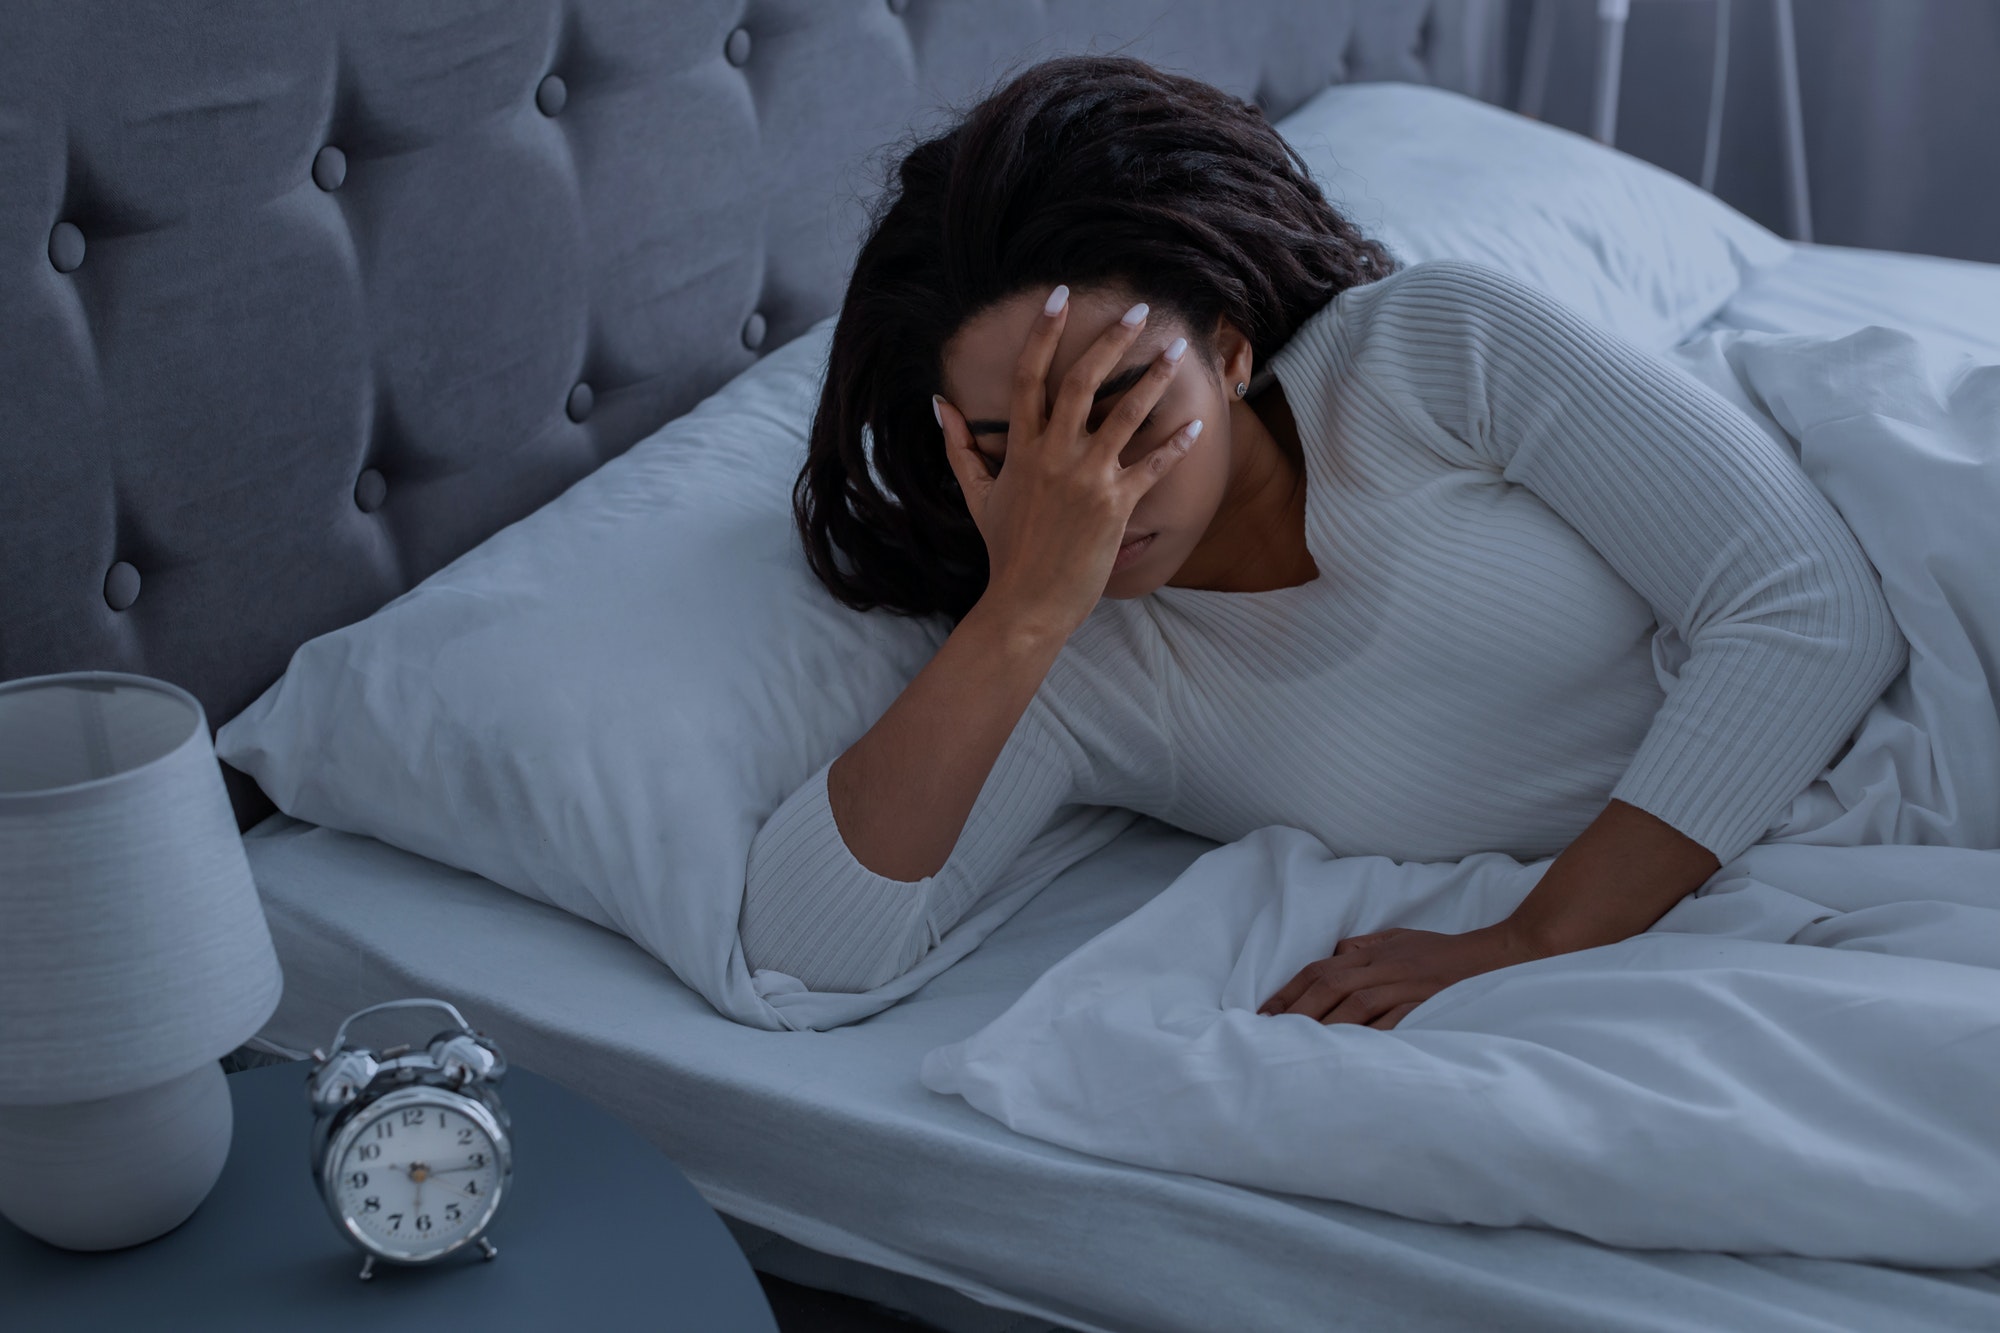 Black woman suffering from insomnia covering face